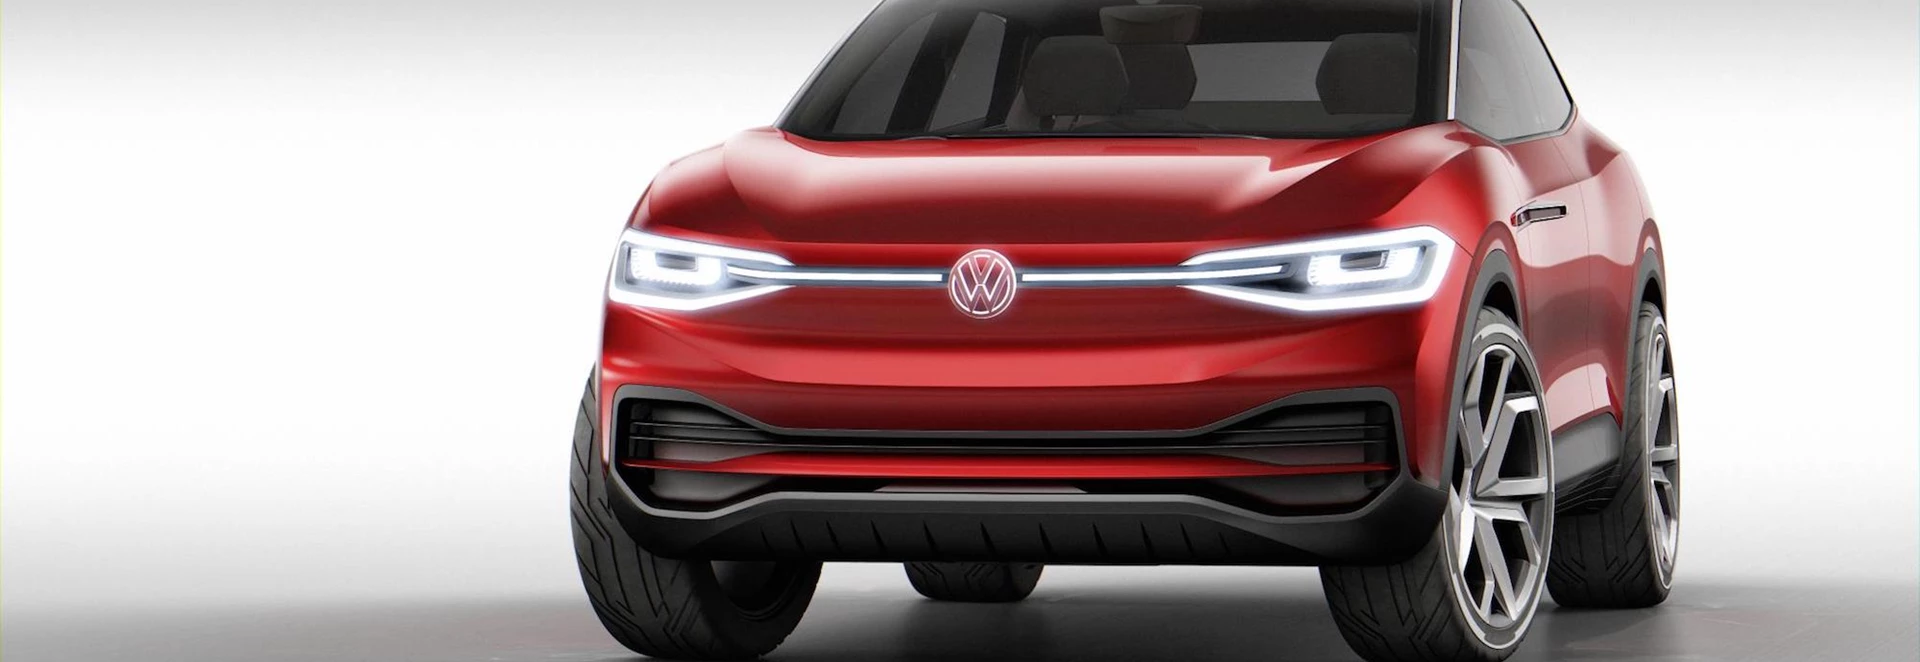 Volkswagen Group to rapidly expand electric vehicle production